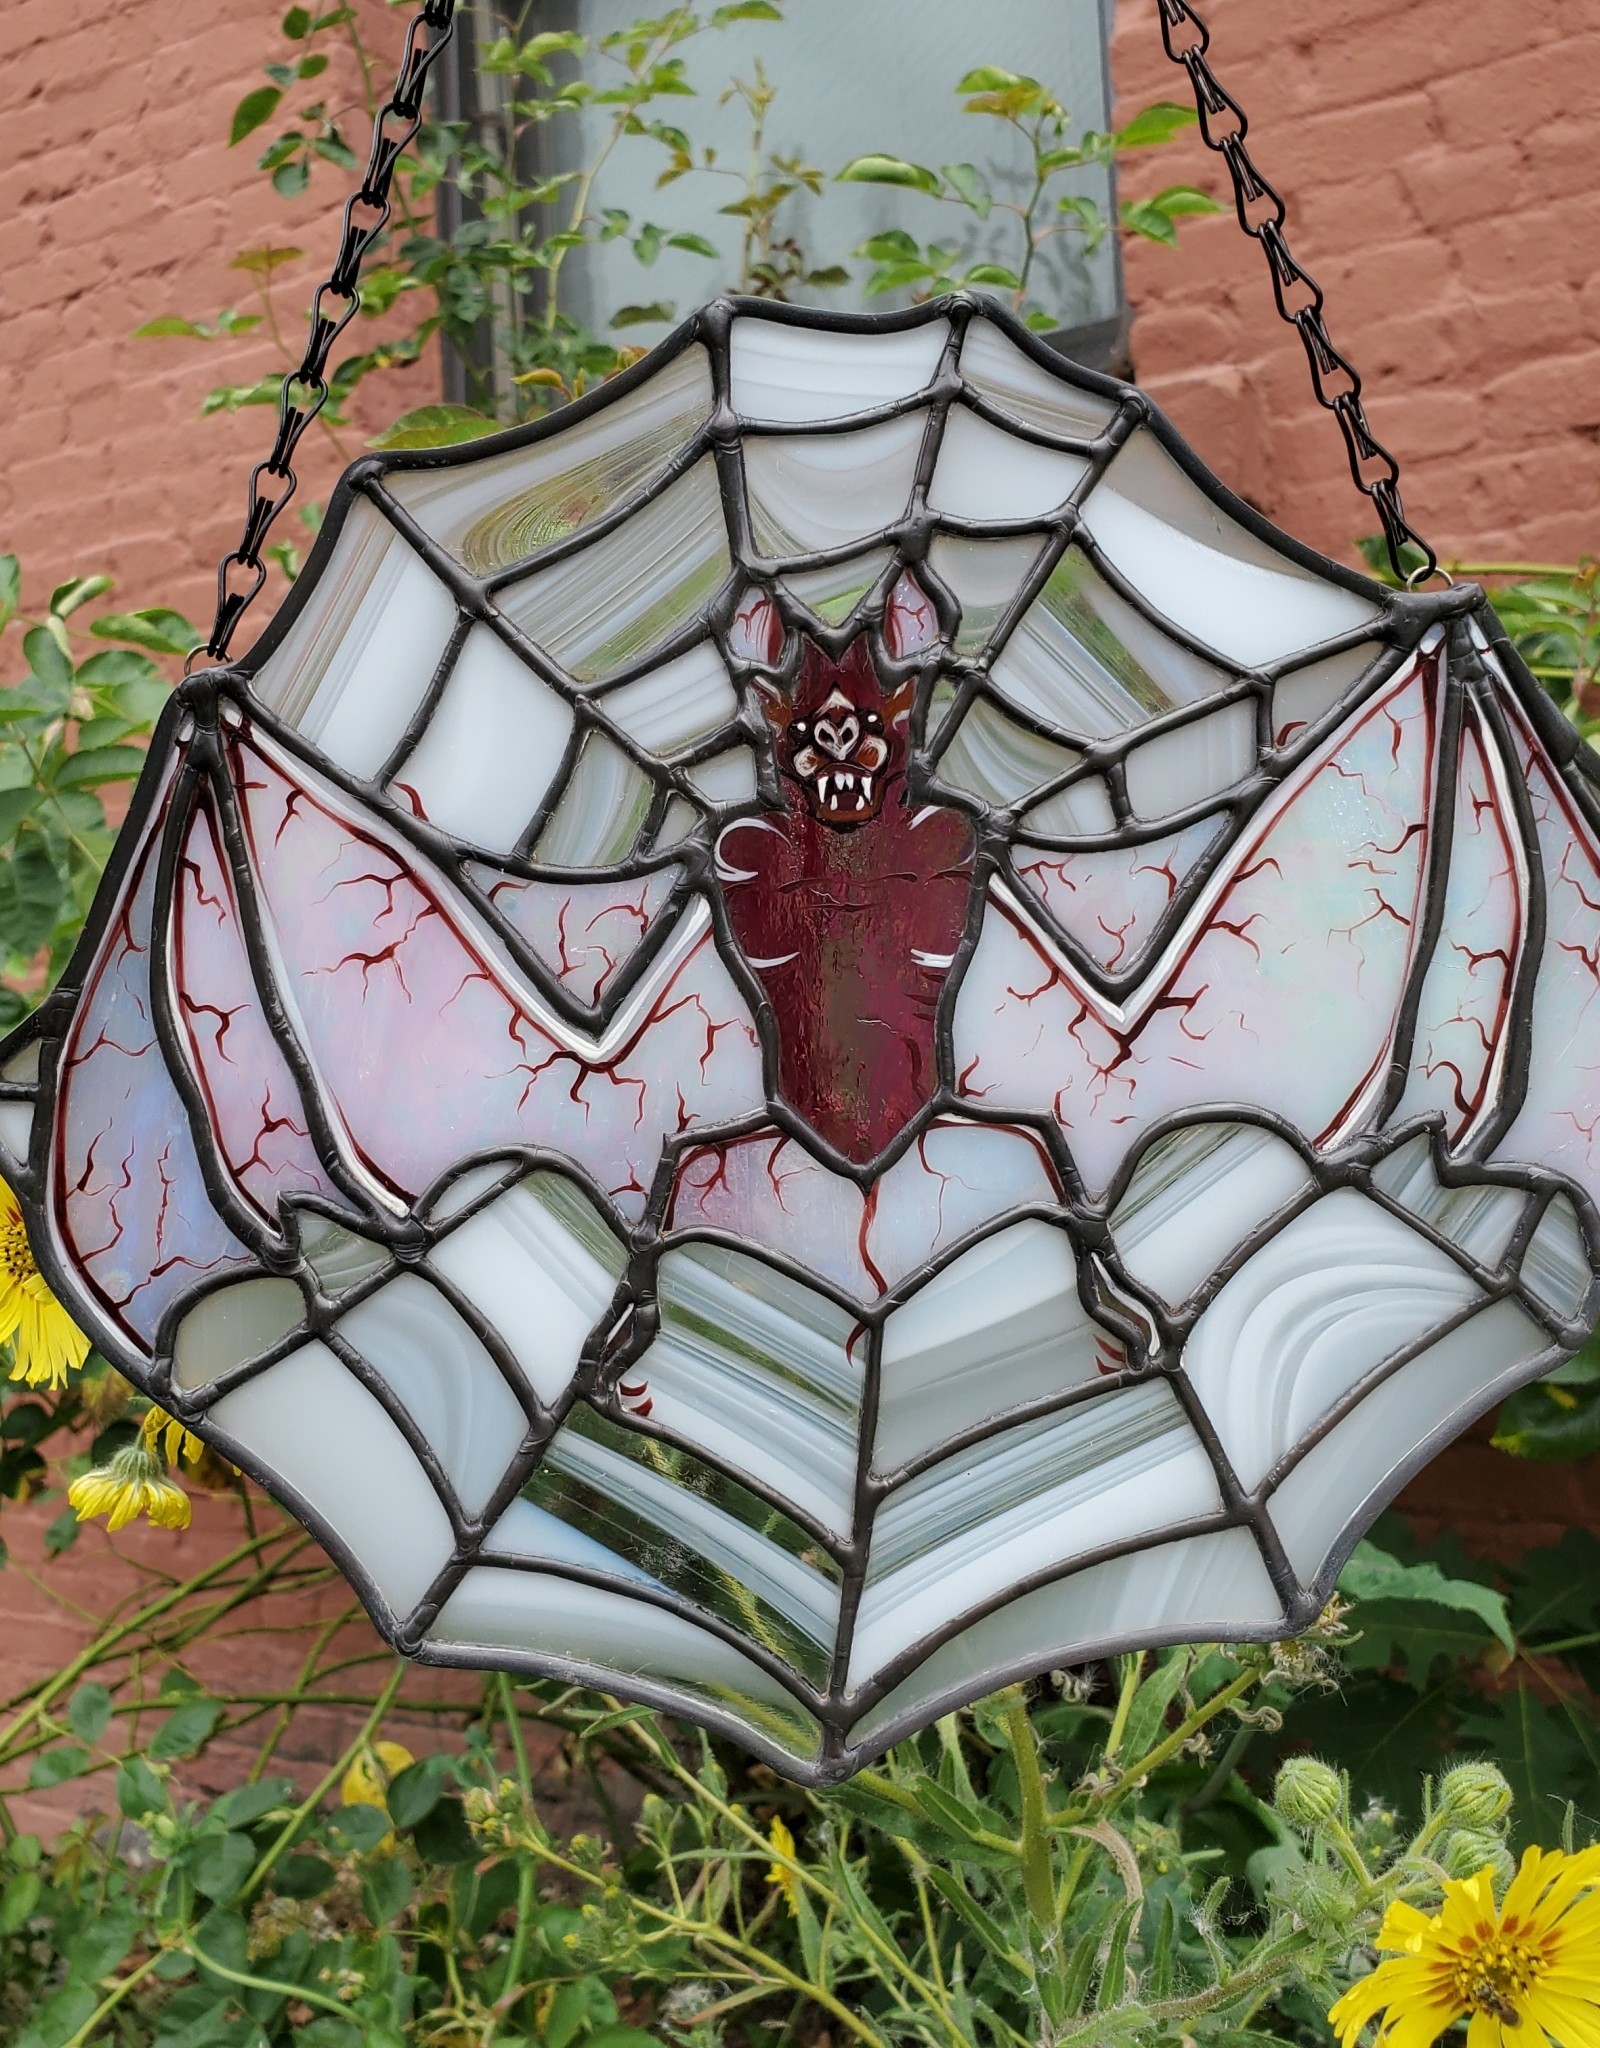 Redux Pink Bat & Spider Web Stained Glass Window Hanging